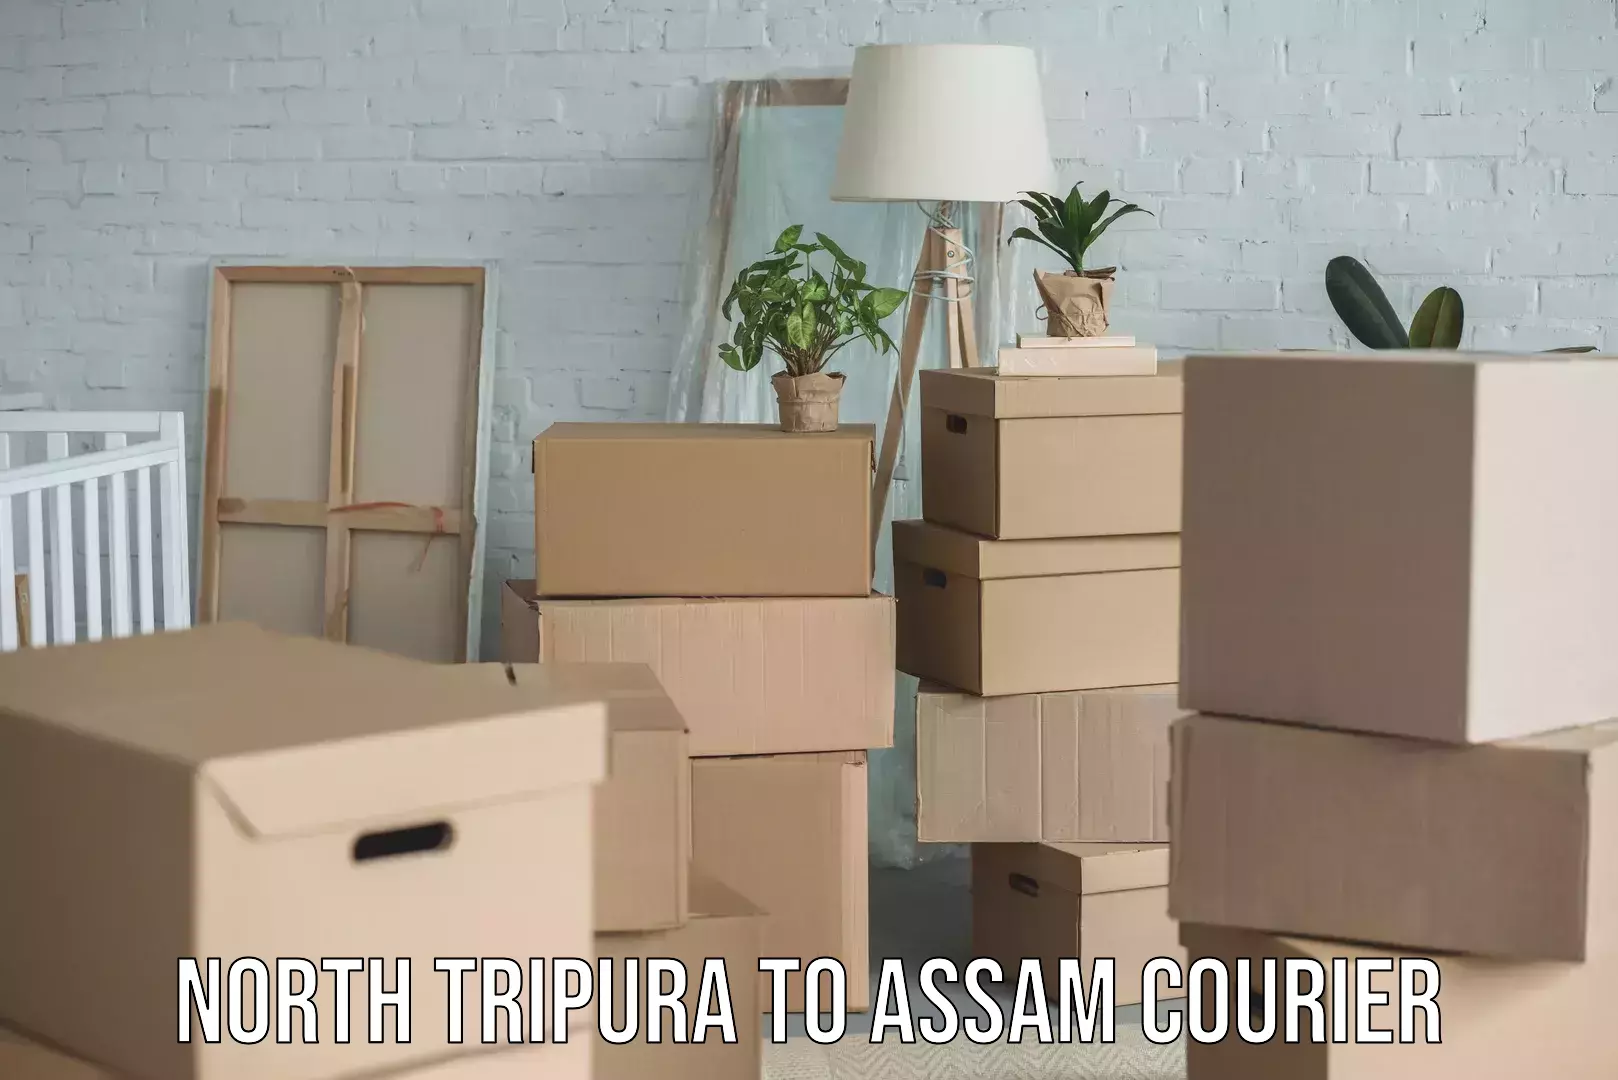 24-hour courier services North Tripura to Assam